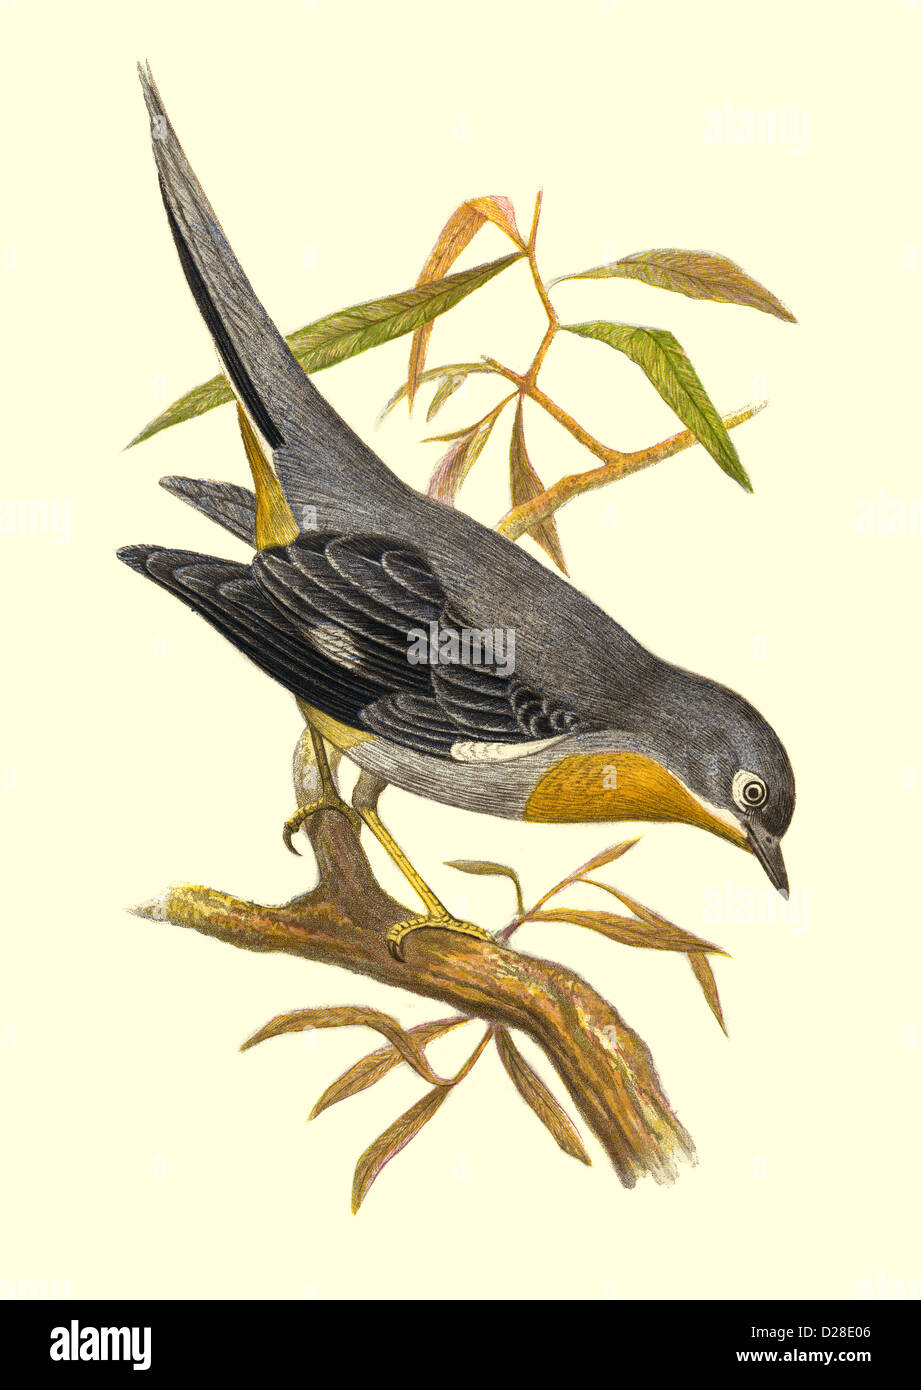 'Whiskered Fantail' High resolution Lithograph Illustration of antiquarian Victorian colour plate from 1860's Cassell's Book of Birds 'Whiskered Fantail' Stock Photo